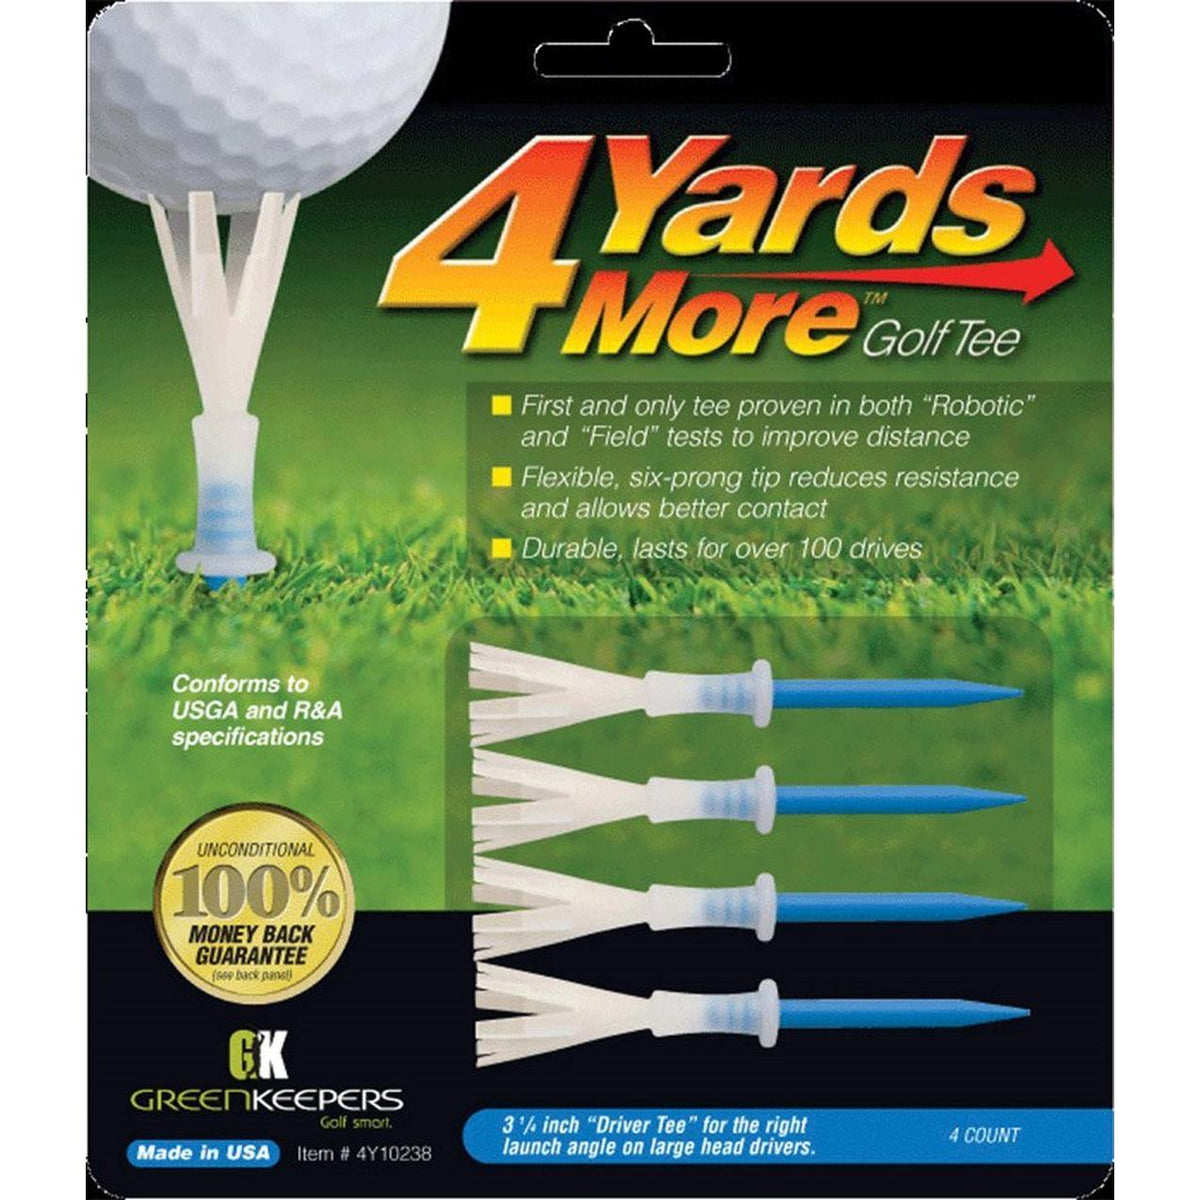 GREEN KEEPERS 4 YARDS MORE GOLF TEES 3 1/4"